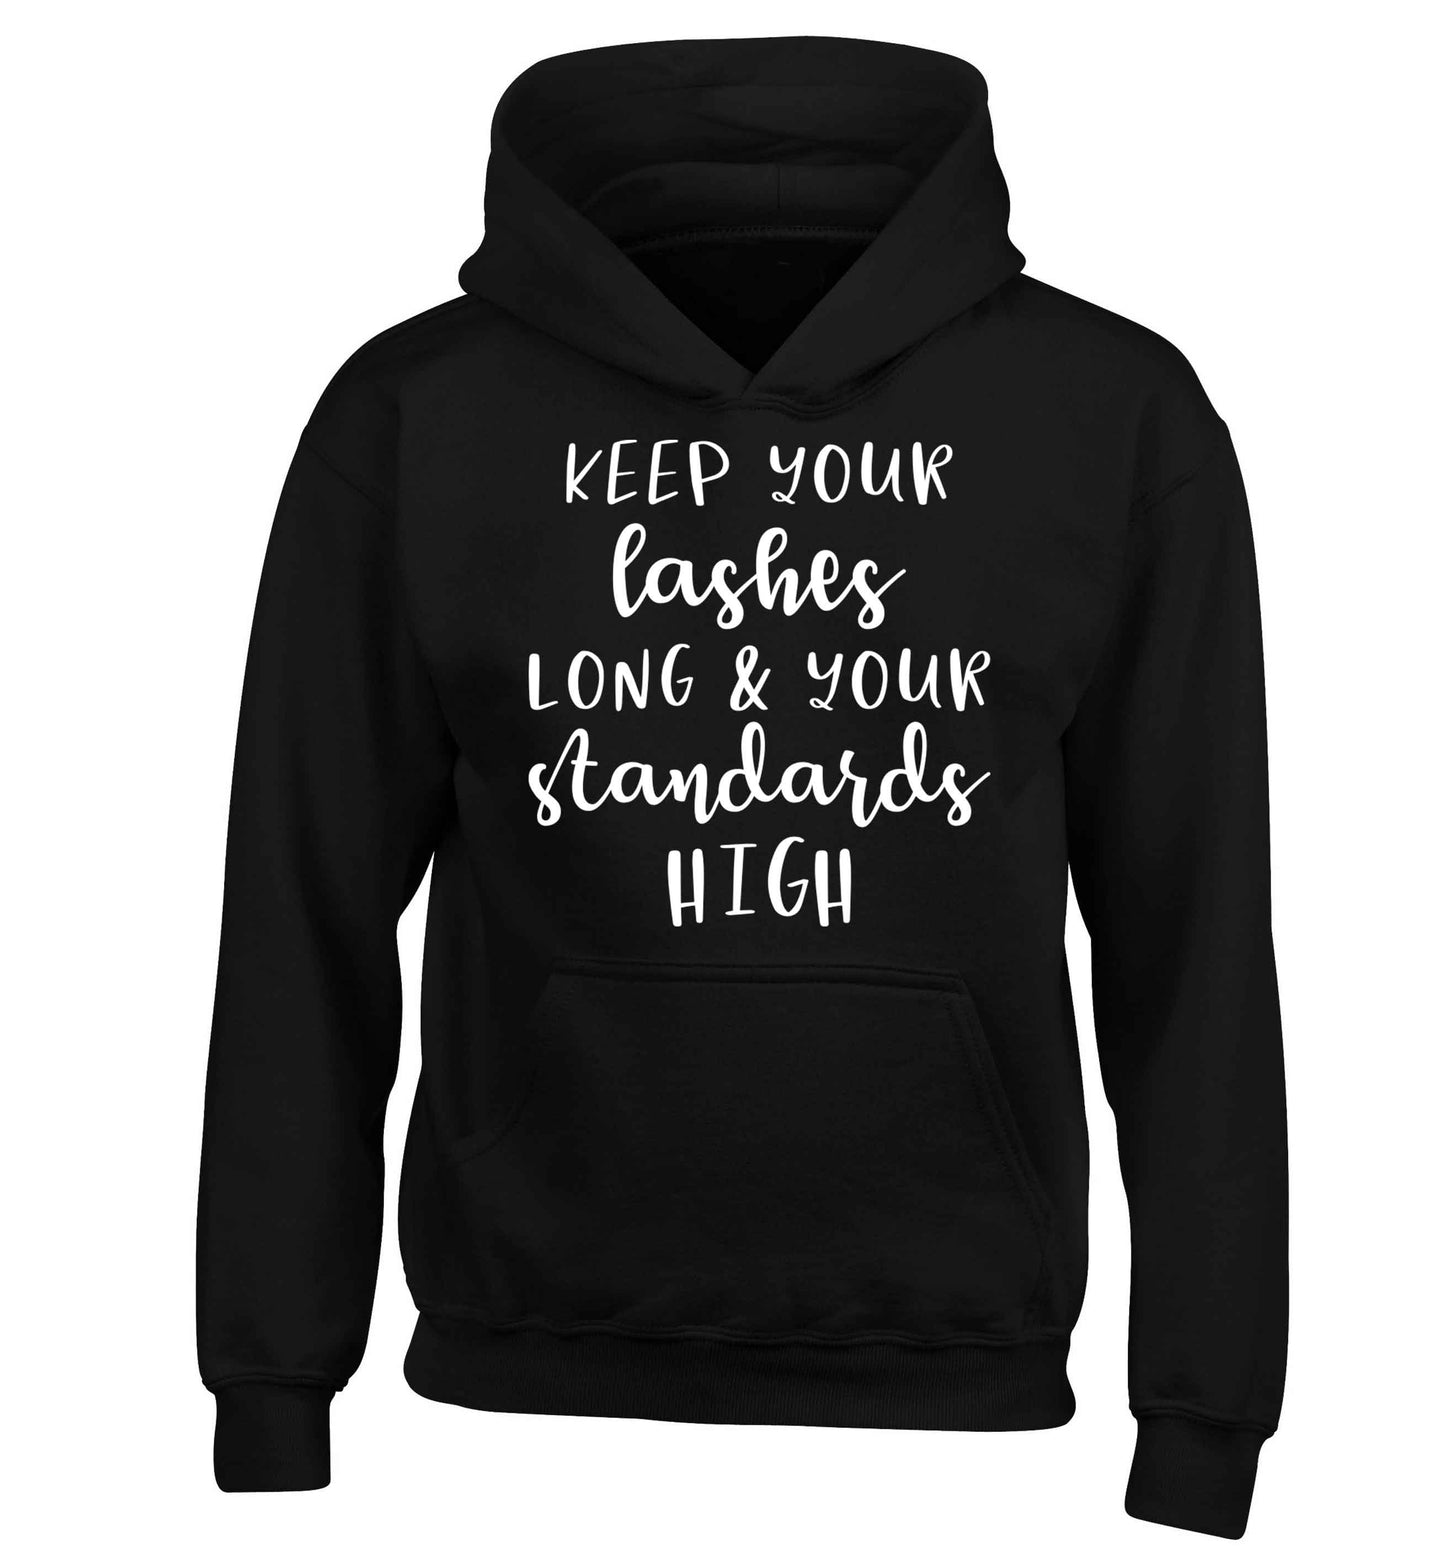 Keep your lashes long and your standards high children's black hoodie 12-13 Years